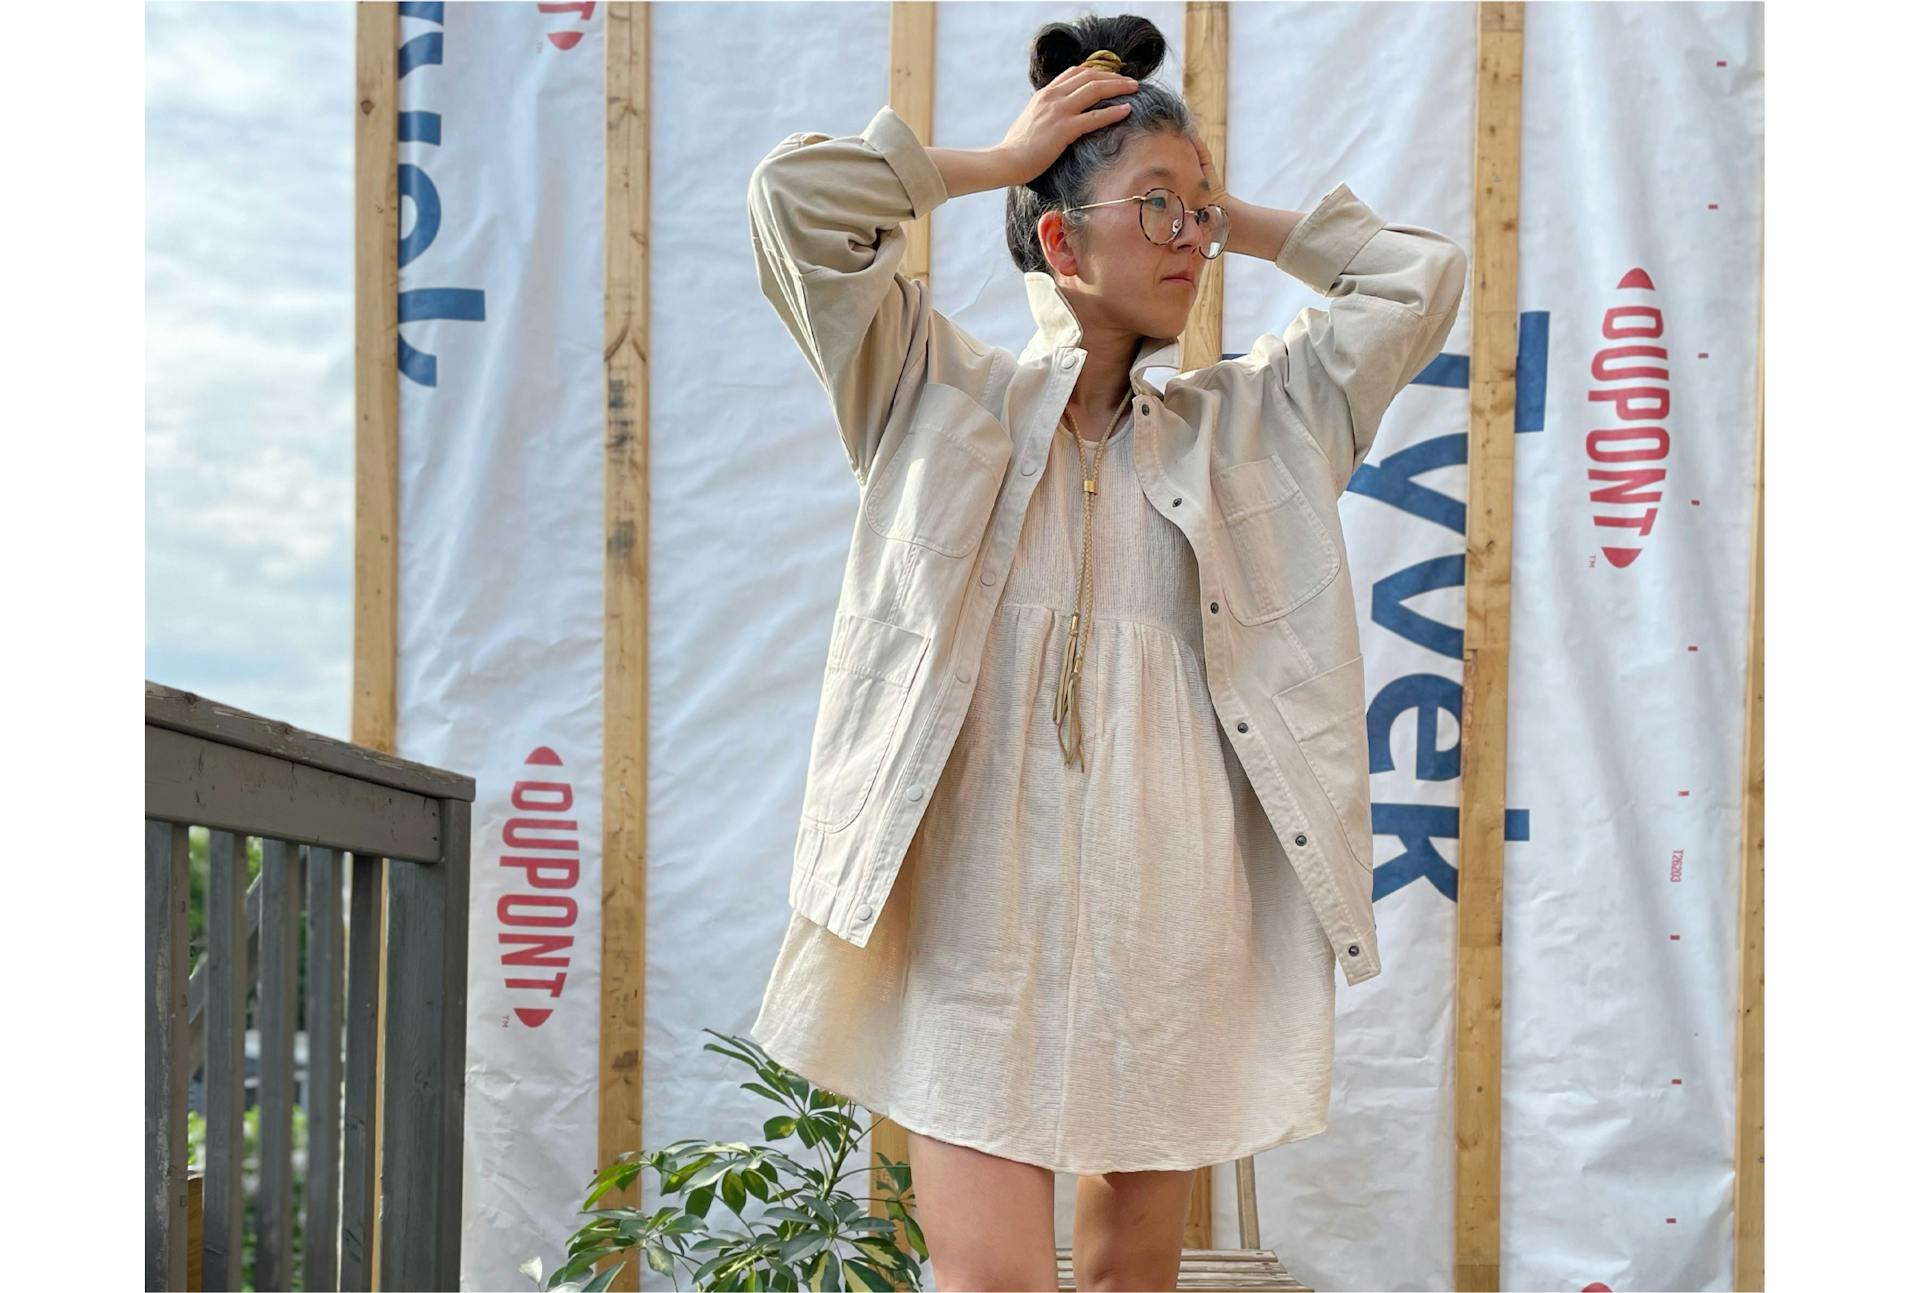 Erica Kim wears a light colored dress and stands outside, holding her hair.